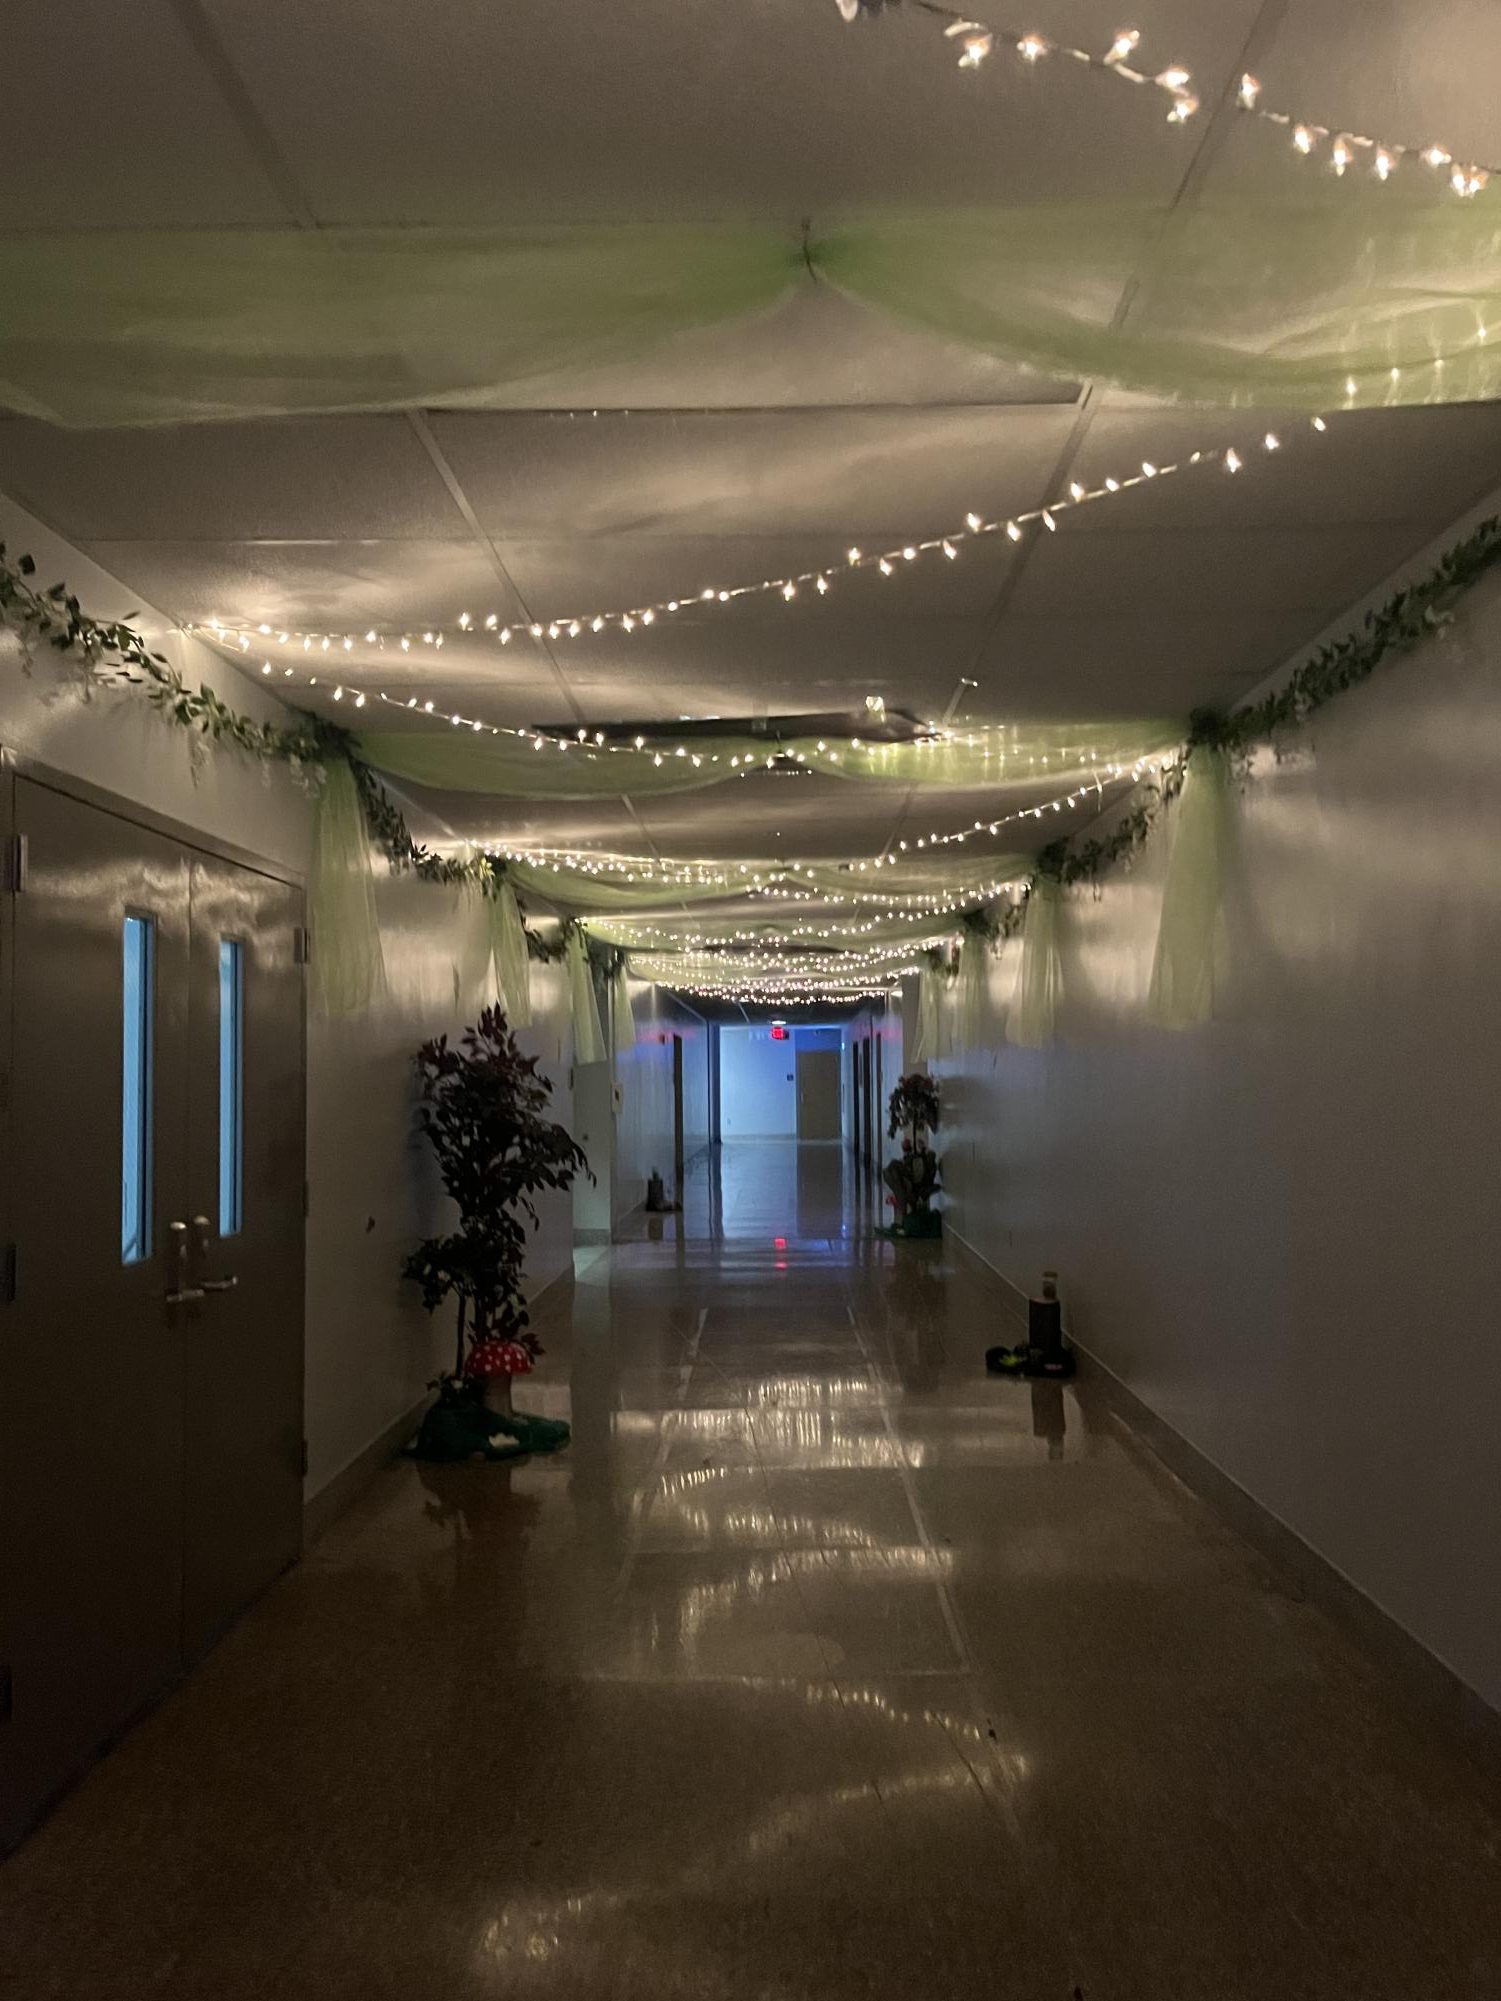 Student Council decorated the hallways with vines and twinkle lights to accommodate the theme: Echanted Forest.